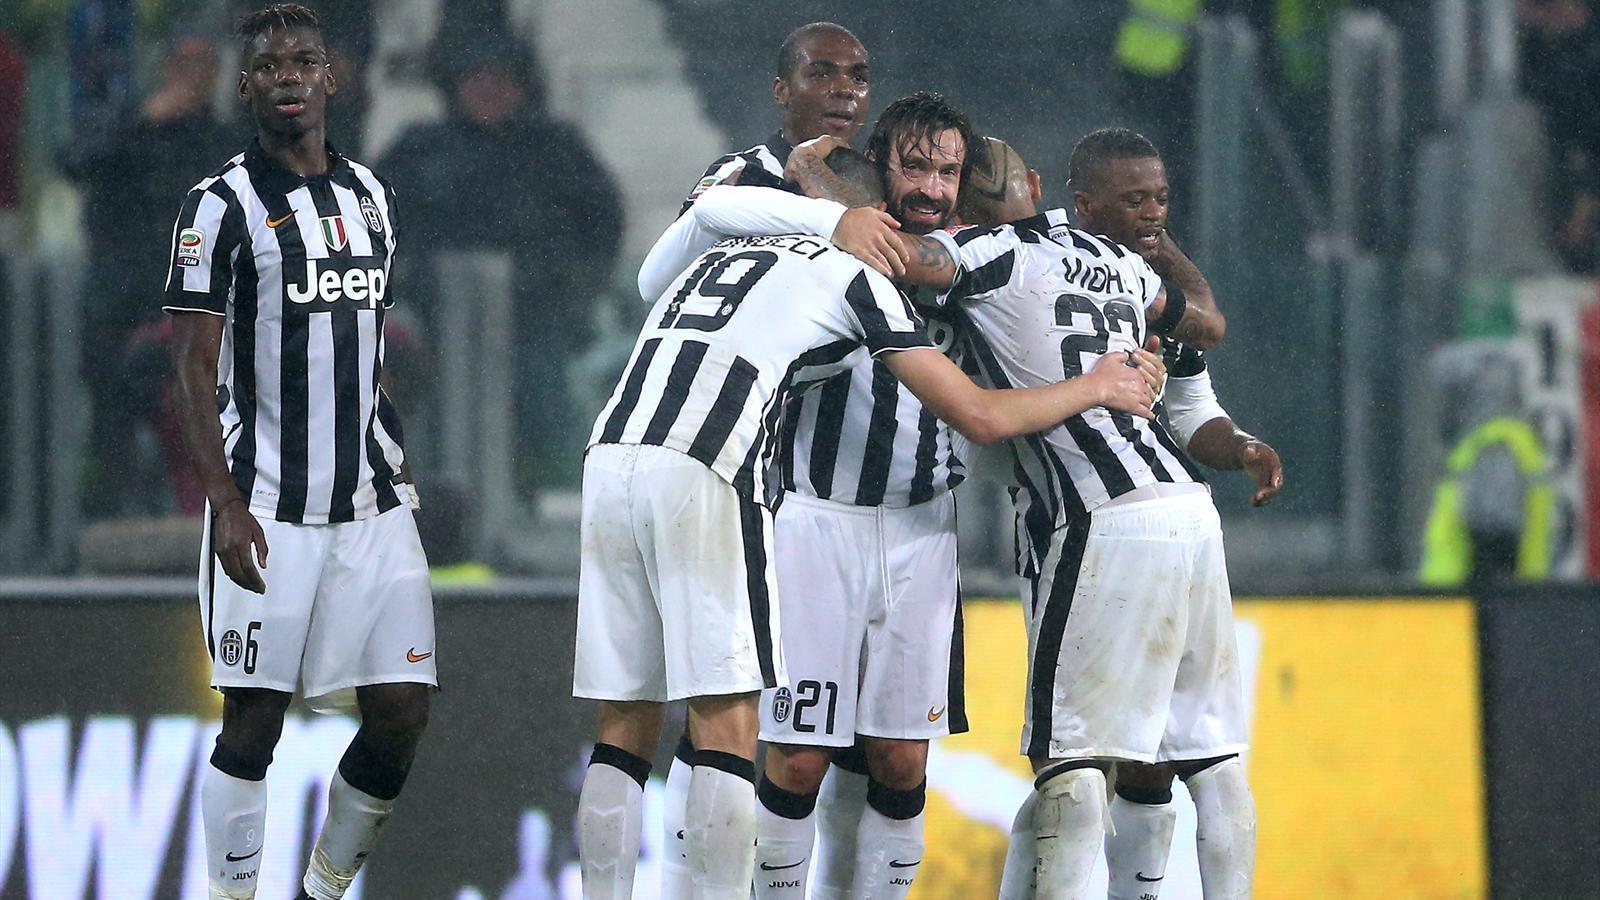 Pirlo nets late winner as Juventus win Turin derby A 2014